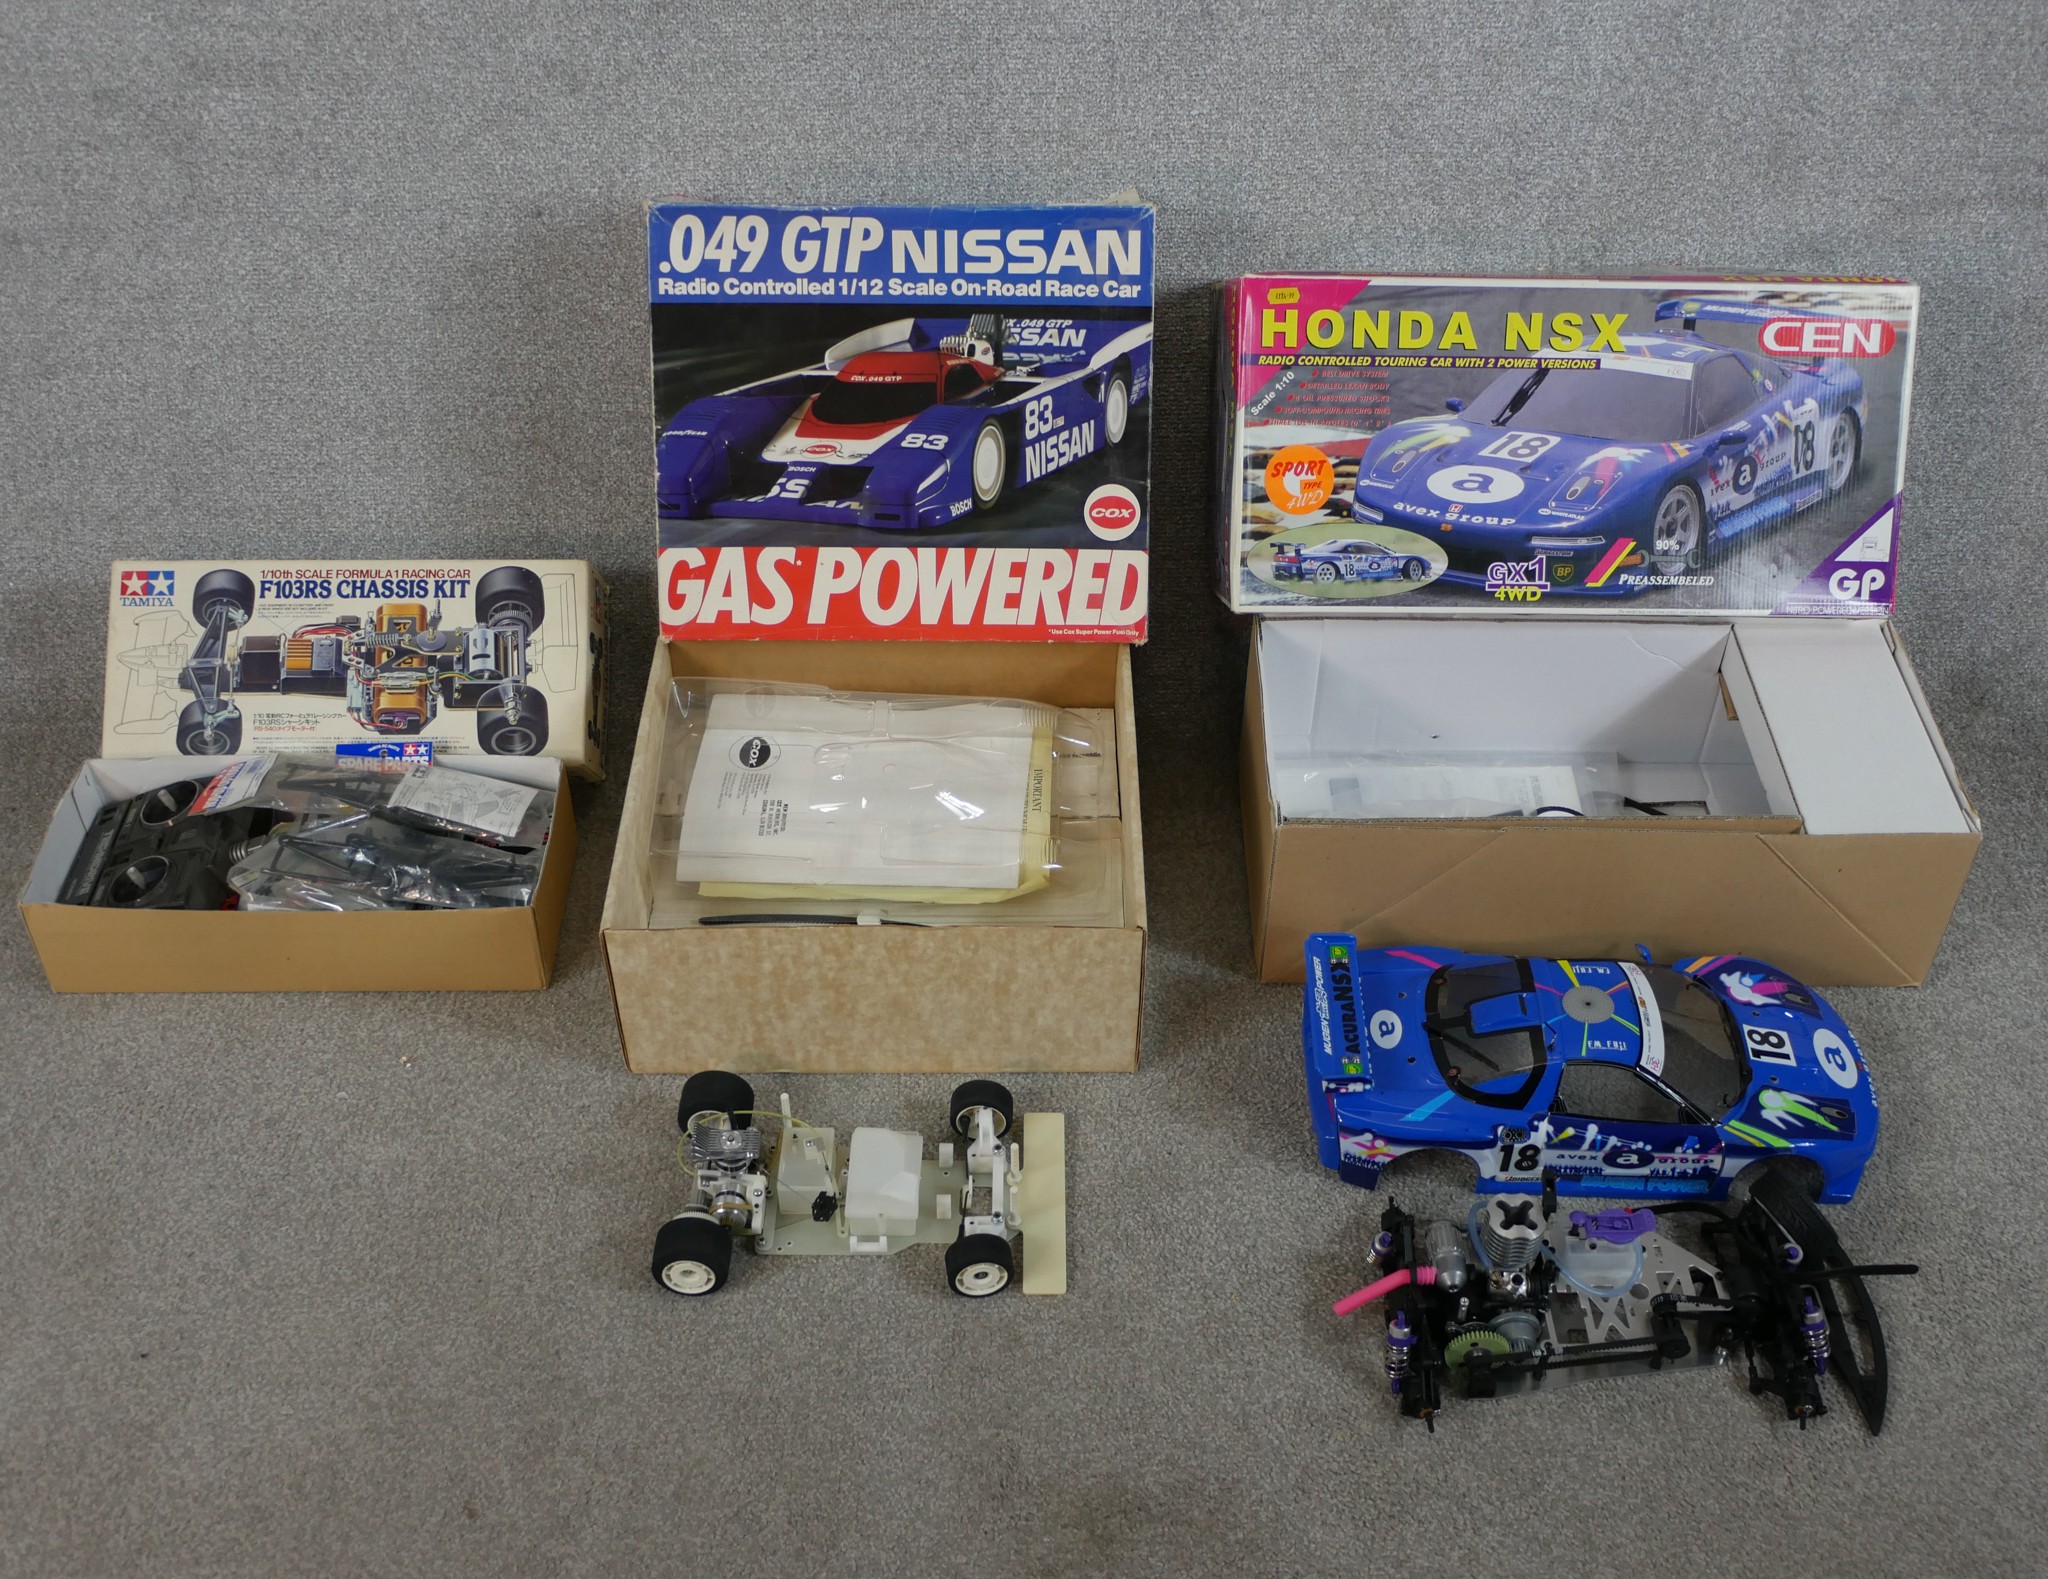 Three boxed scale model cars to include Tamiya 1:10 F103RS Chassis kit, Nissan 93 Cox racing car &